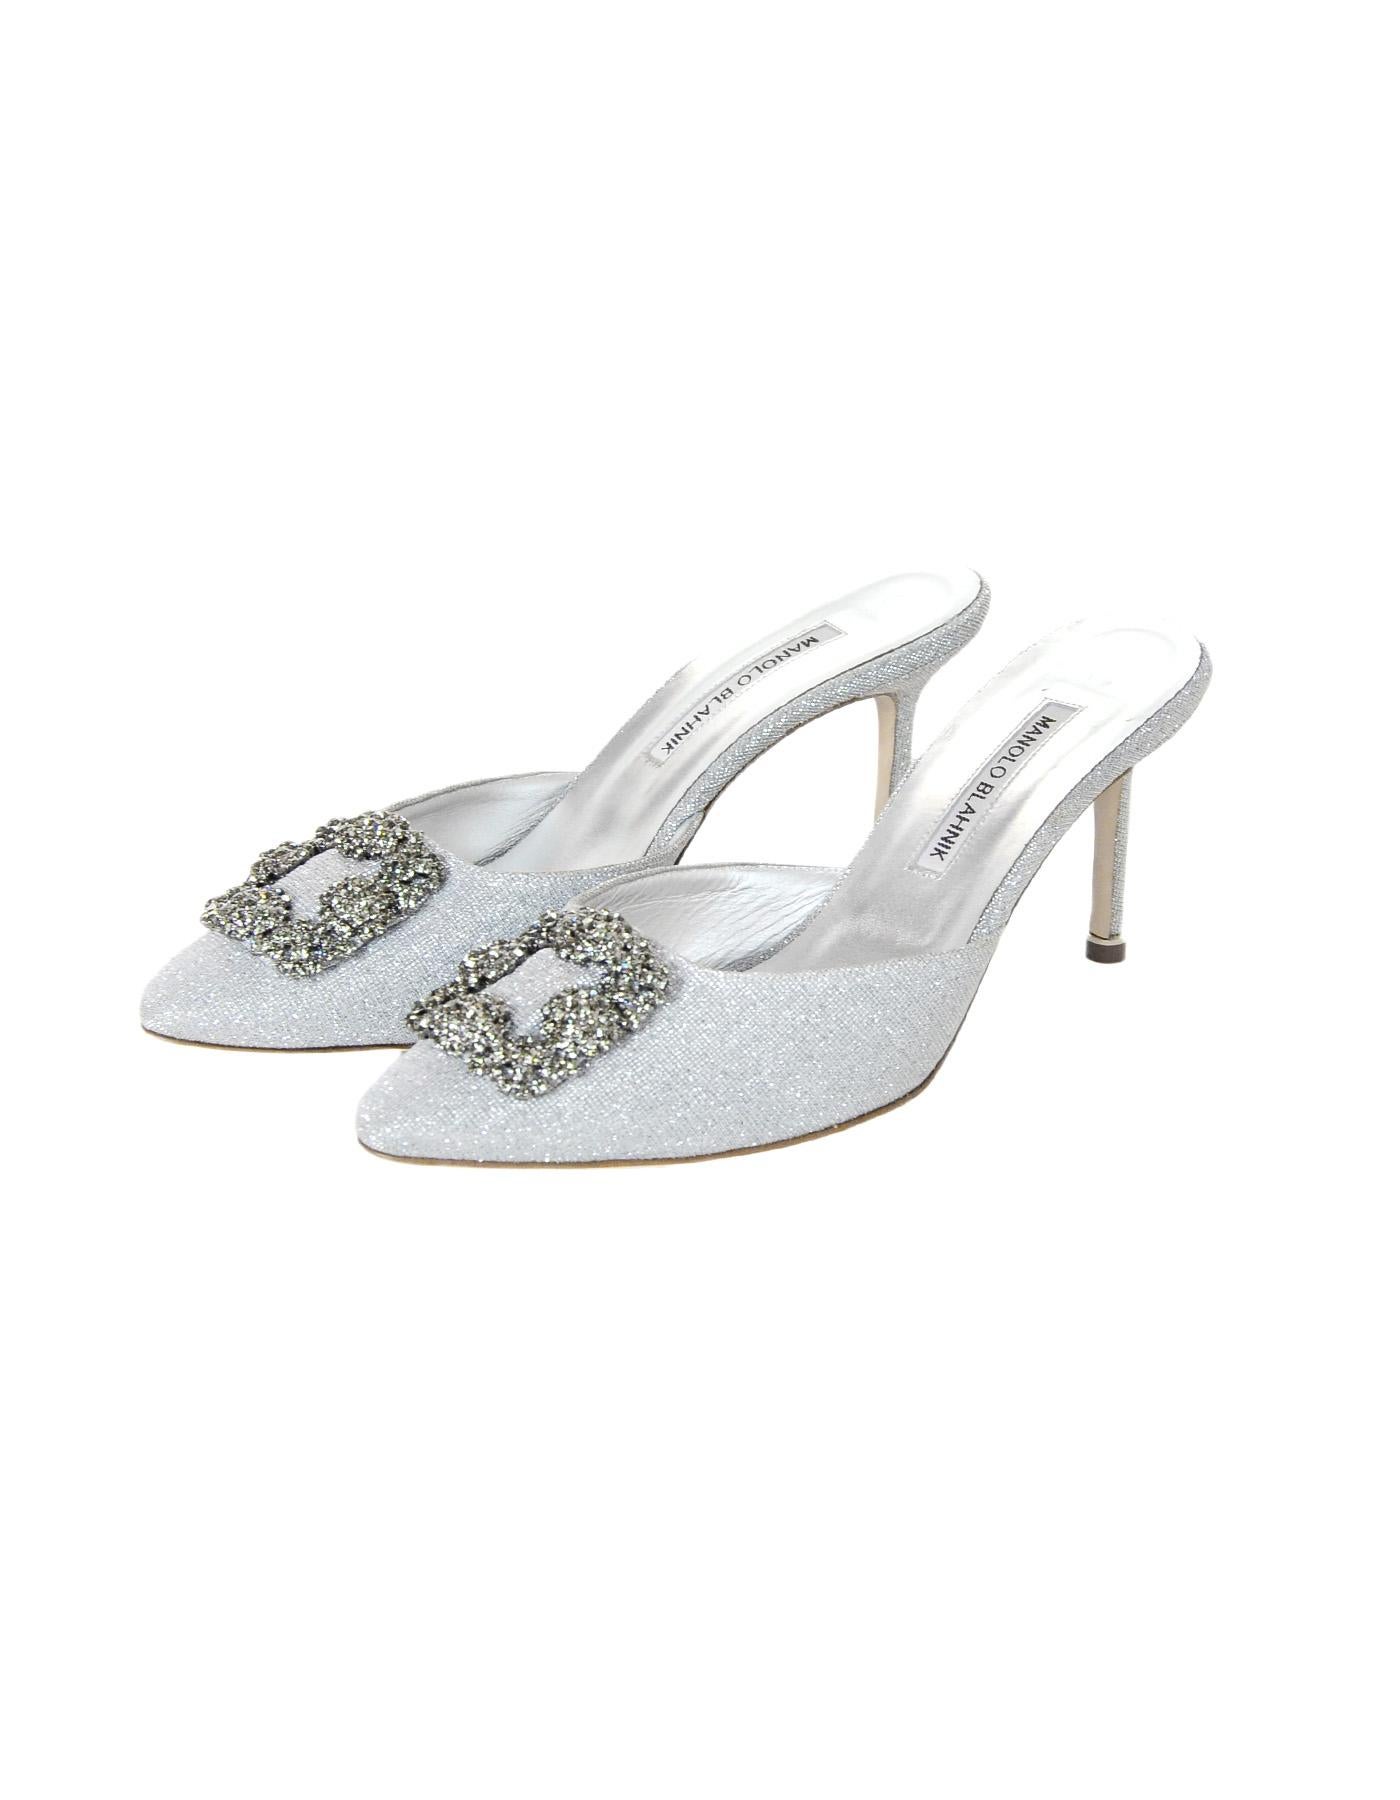 Manolo Blahnik Silver Metallic Hangisi Mule Heels Sz 39.5

Made In: Italy
Color: Silver
Hardware: Silvertone and crystals
Materials: Leather, fabric, crystals  
Closure/Opening:  Slide on
Overall Condition: Like new condition 
Estimated Retail: $985